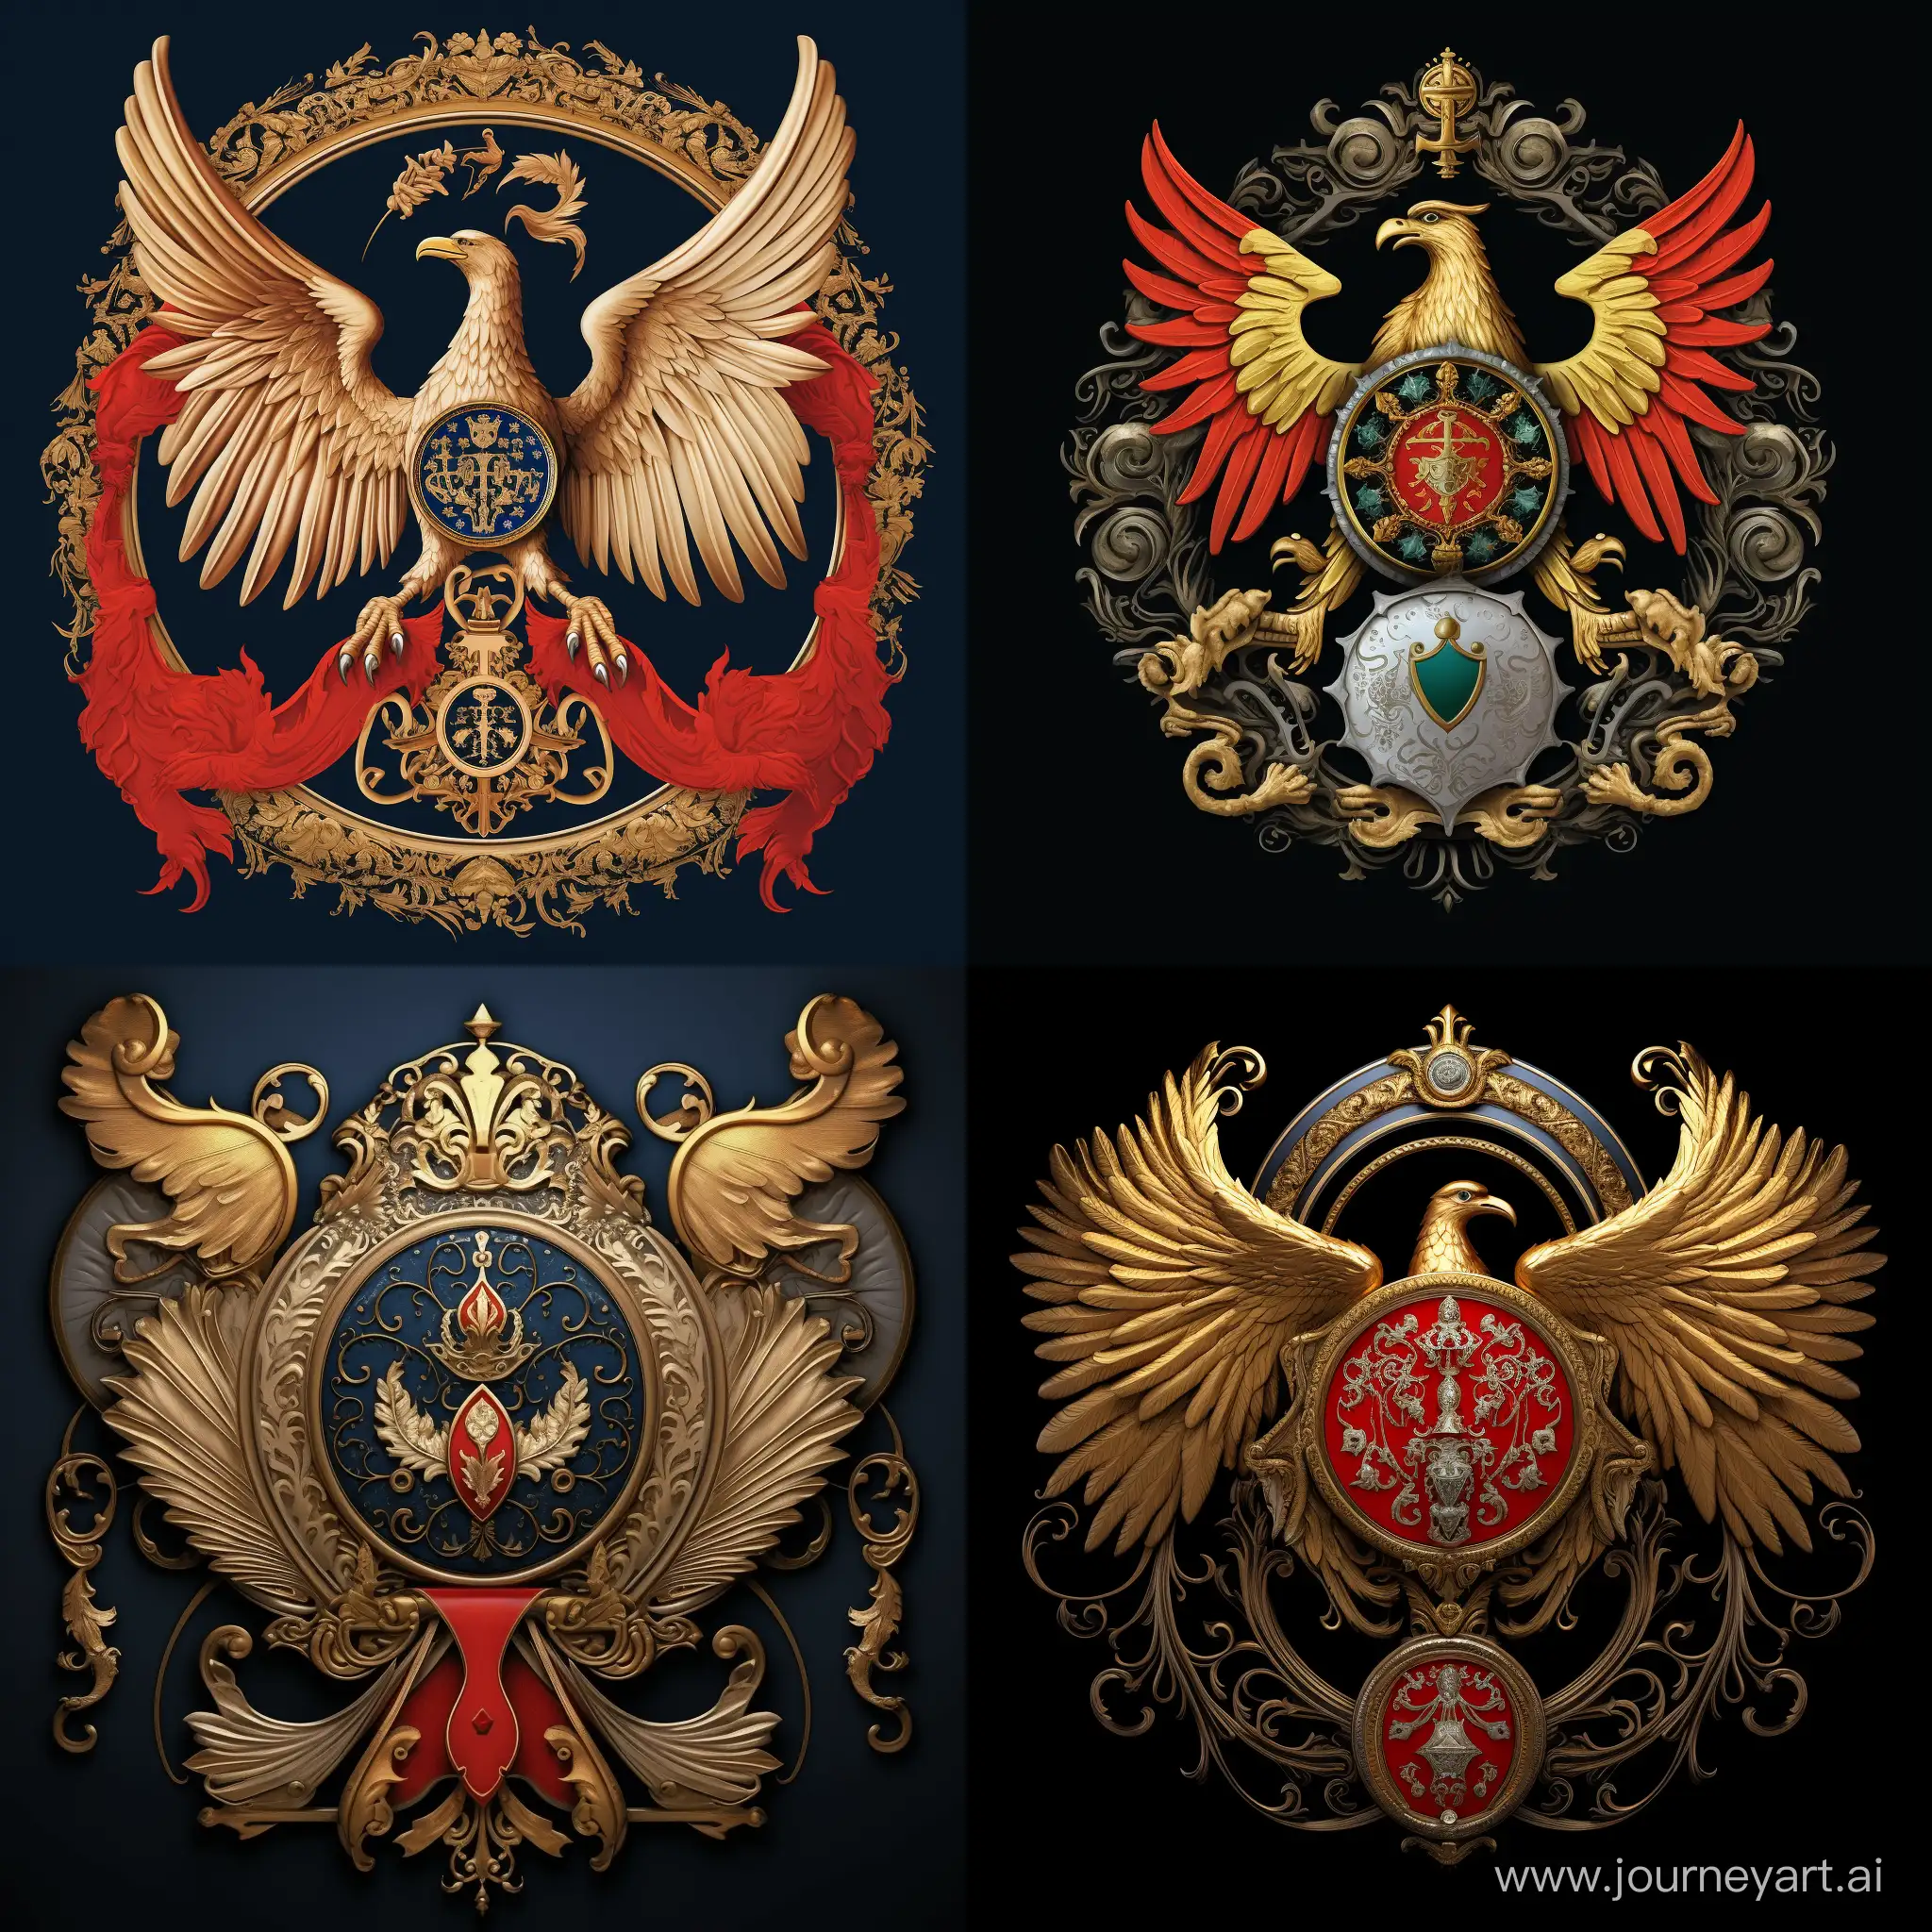 Ottoman-Empire-Coat-of-Arms-Historical-Symbol-of-Power-and-Legacy